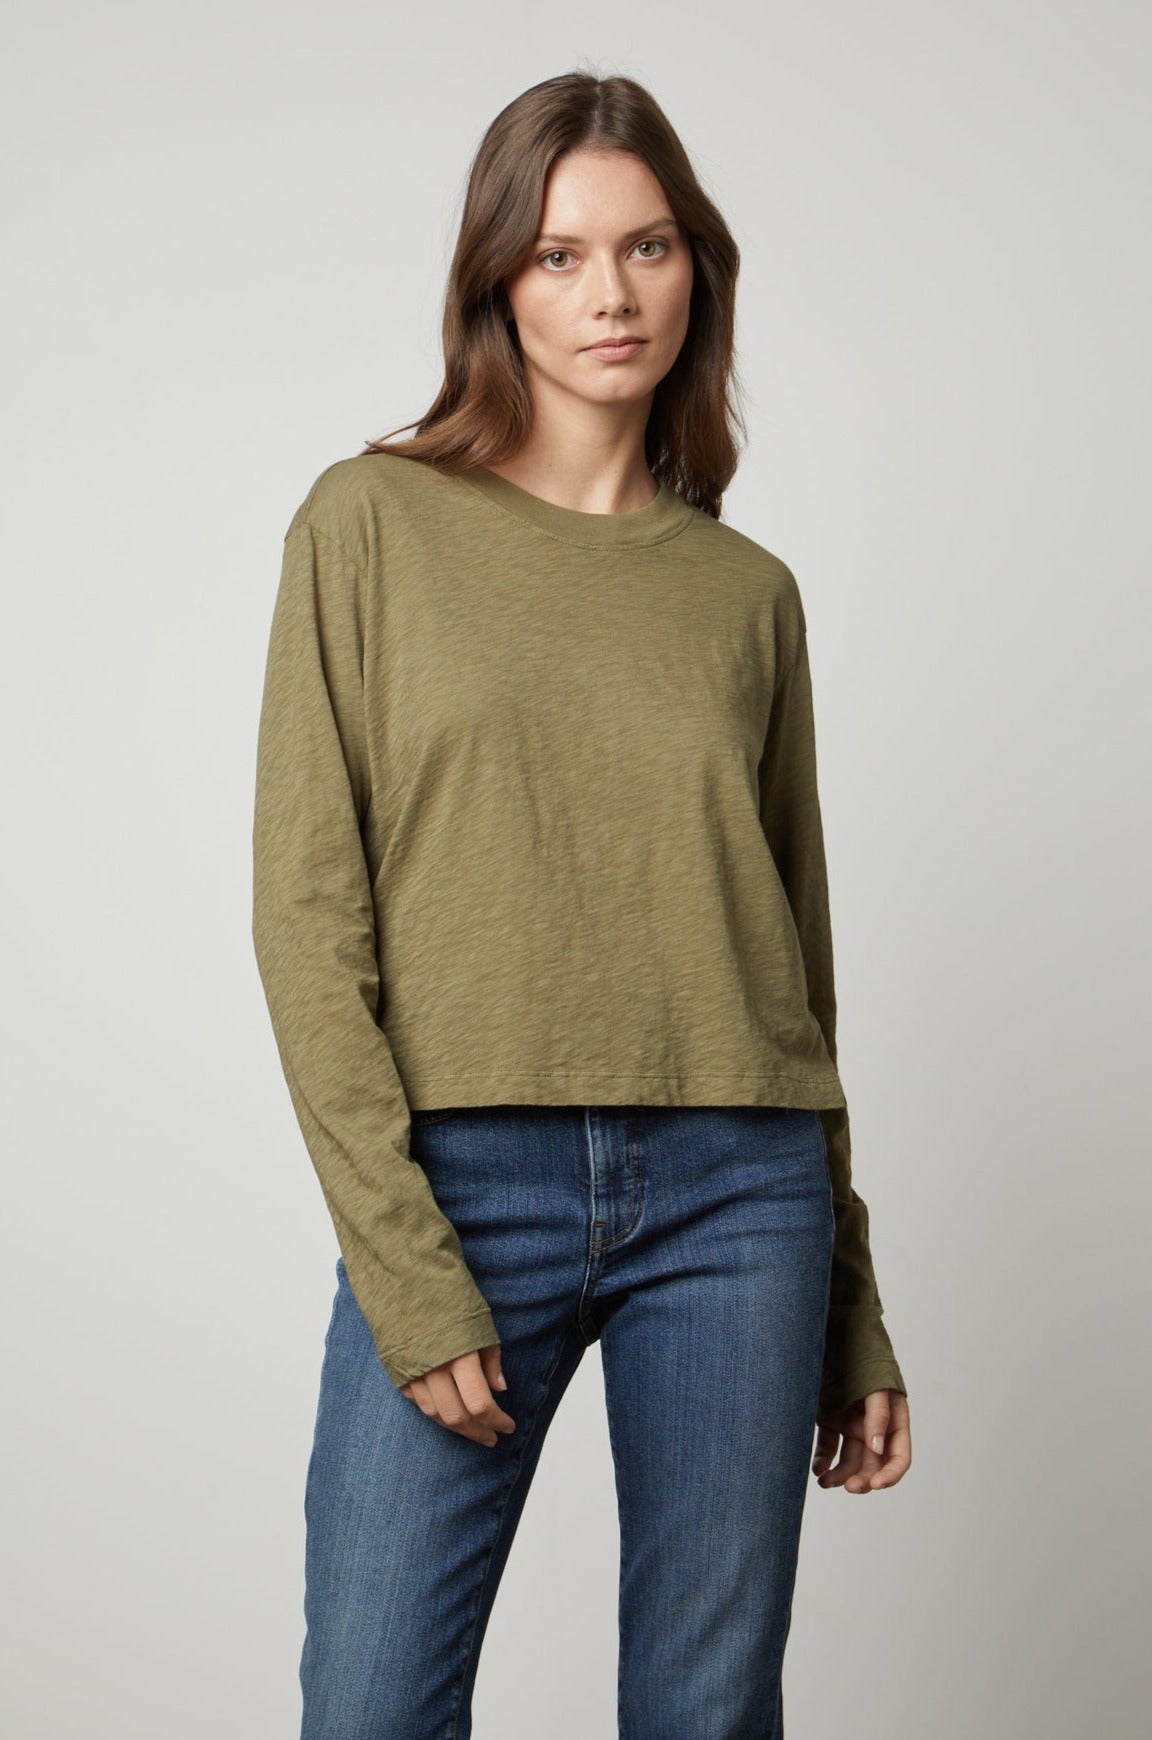   The Velvet by Graham & Spencer HEATHER CREW NECK CROPPED TEE in olive green. 